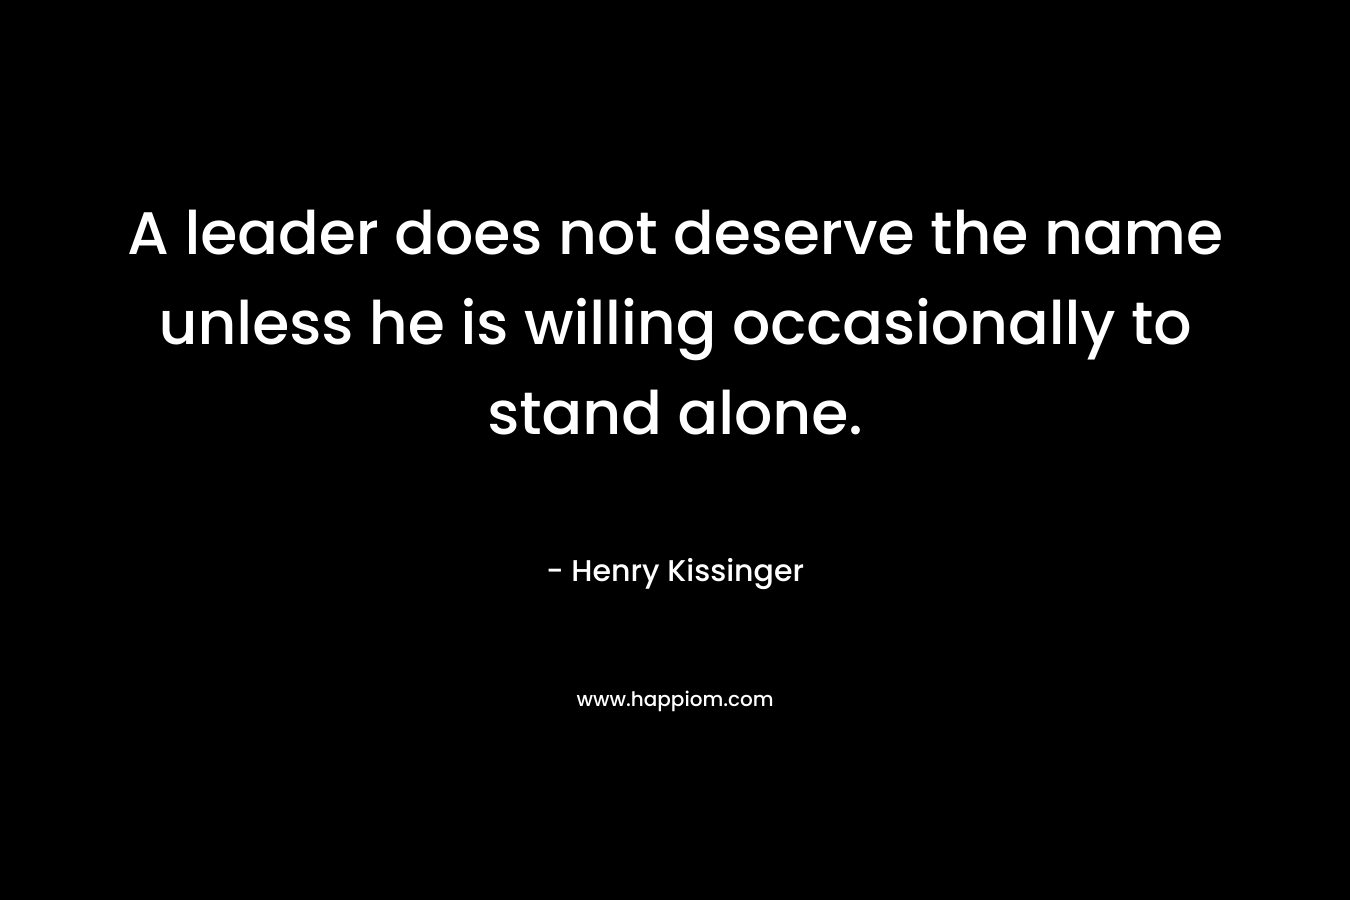 A leader does not deserve the name unless he is willing occasionally to stand alone. – Henry Kissinger